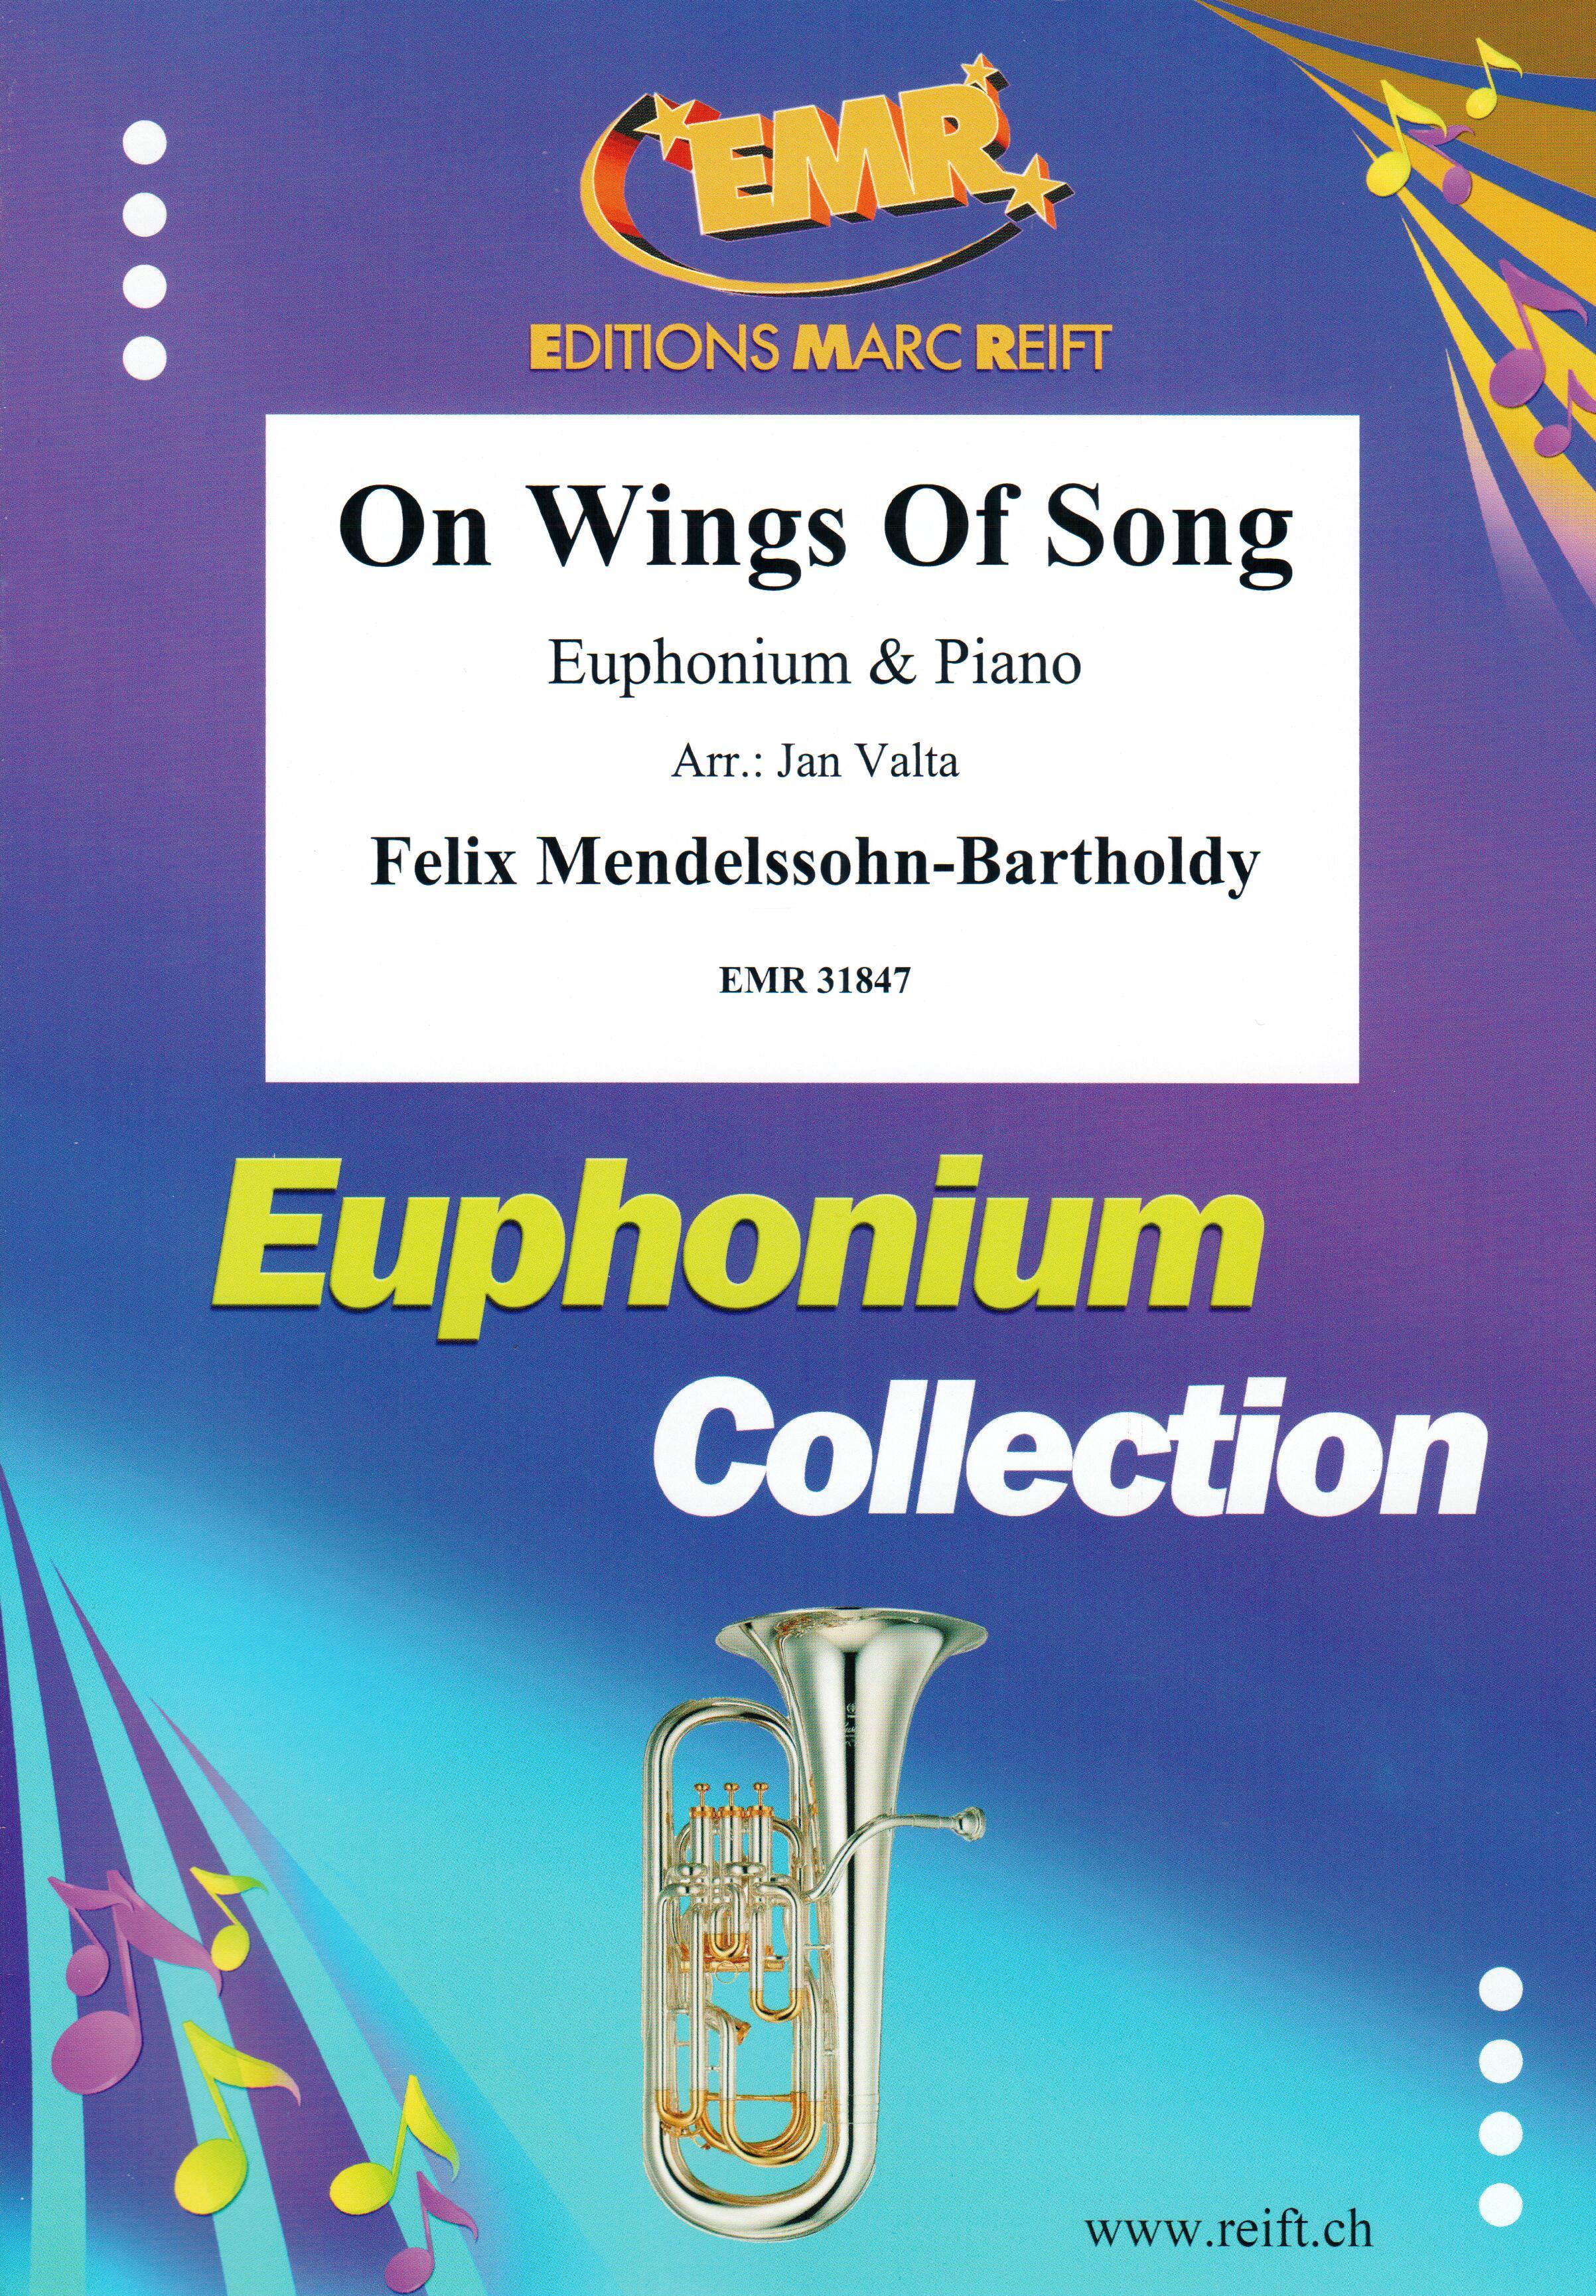 ON WINGS OF SONG, SOLOS - Euphonium